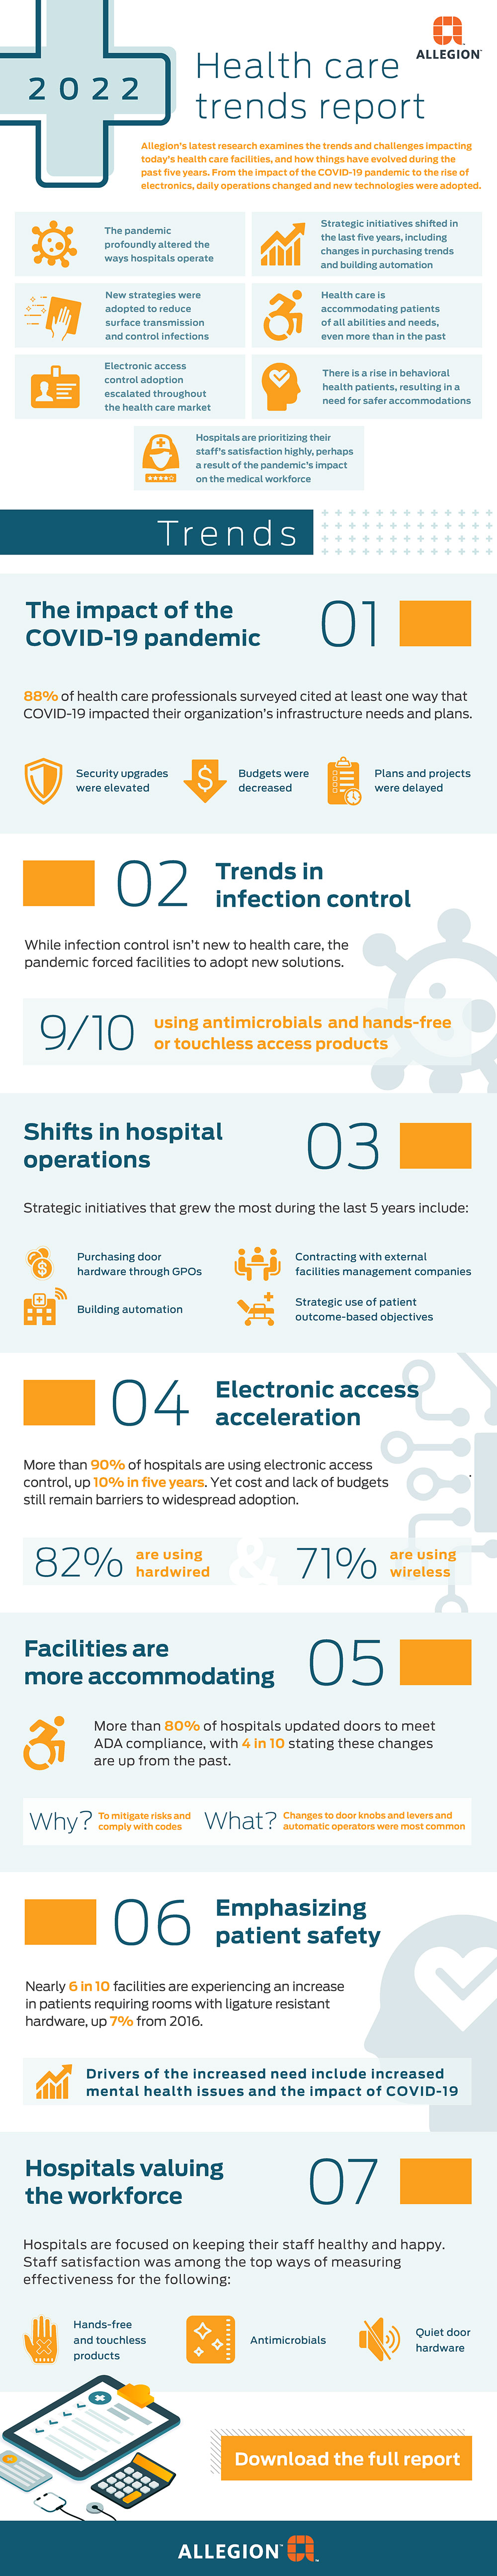 Infographic explaining the top trends from Allegion's health care industry research report